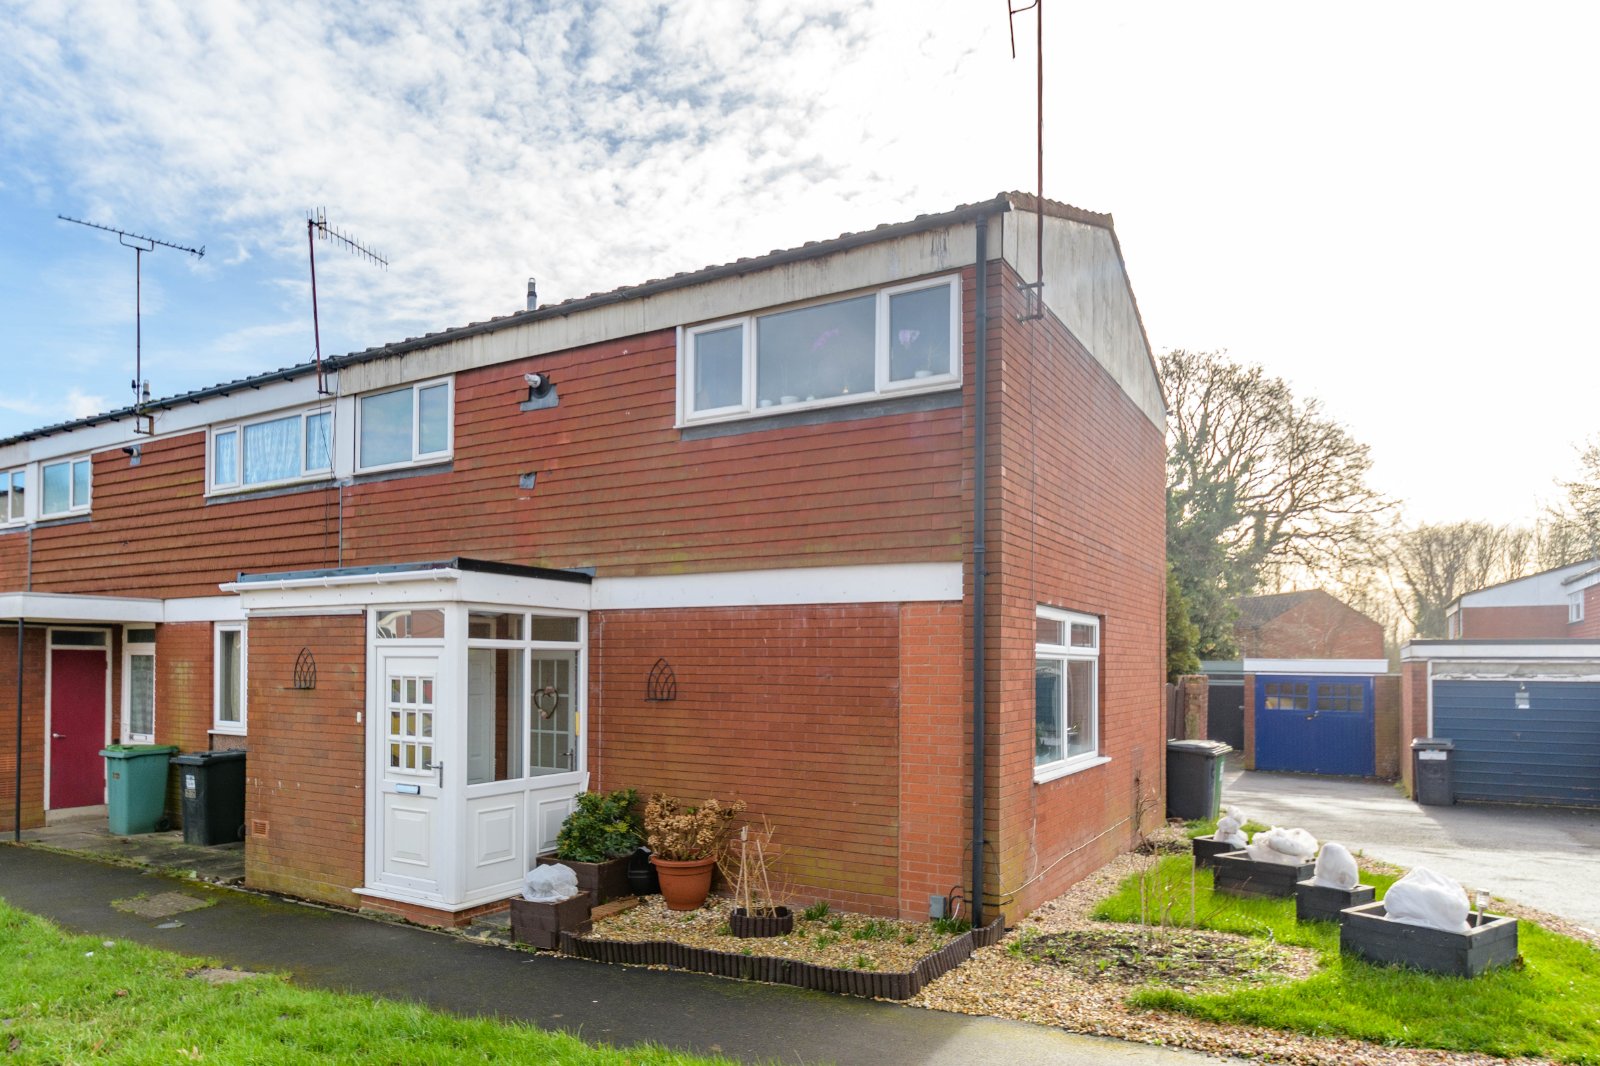 3 bed house for sale in Chedworth Close, Redditch - Property Image 1